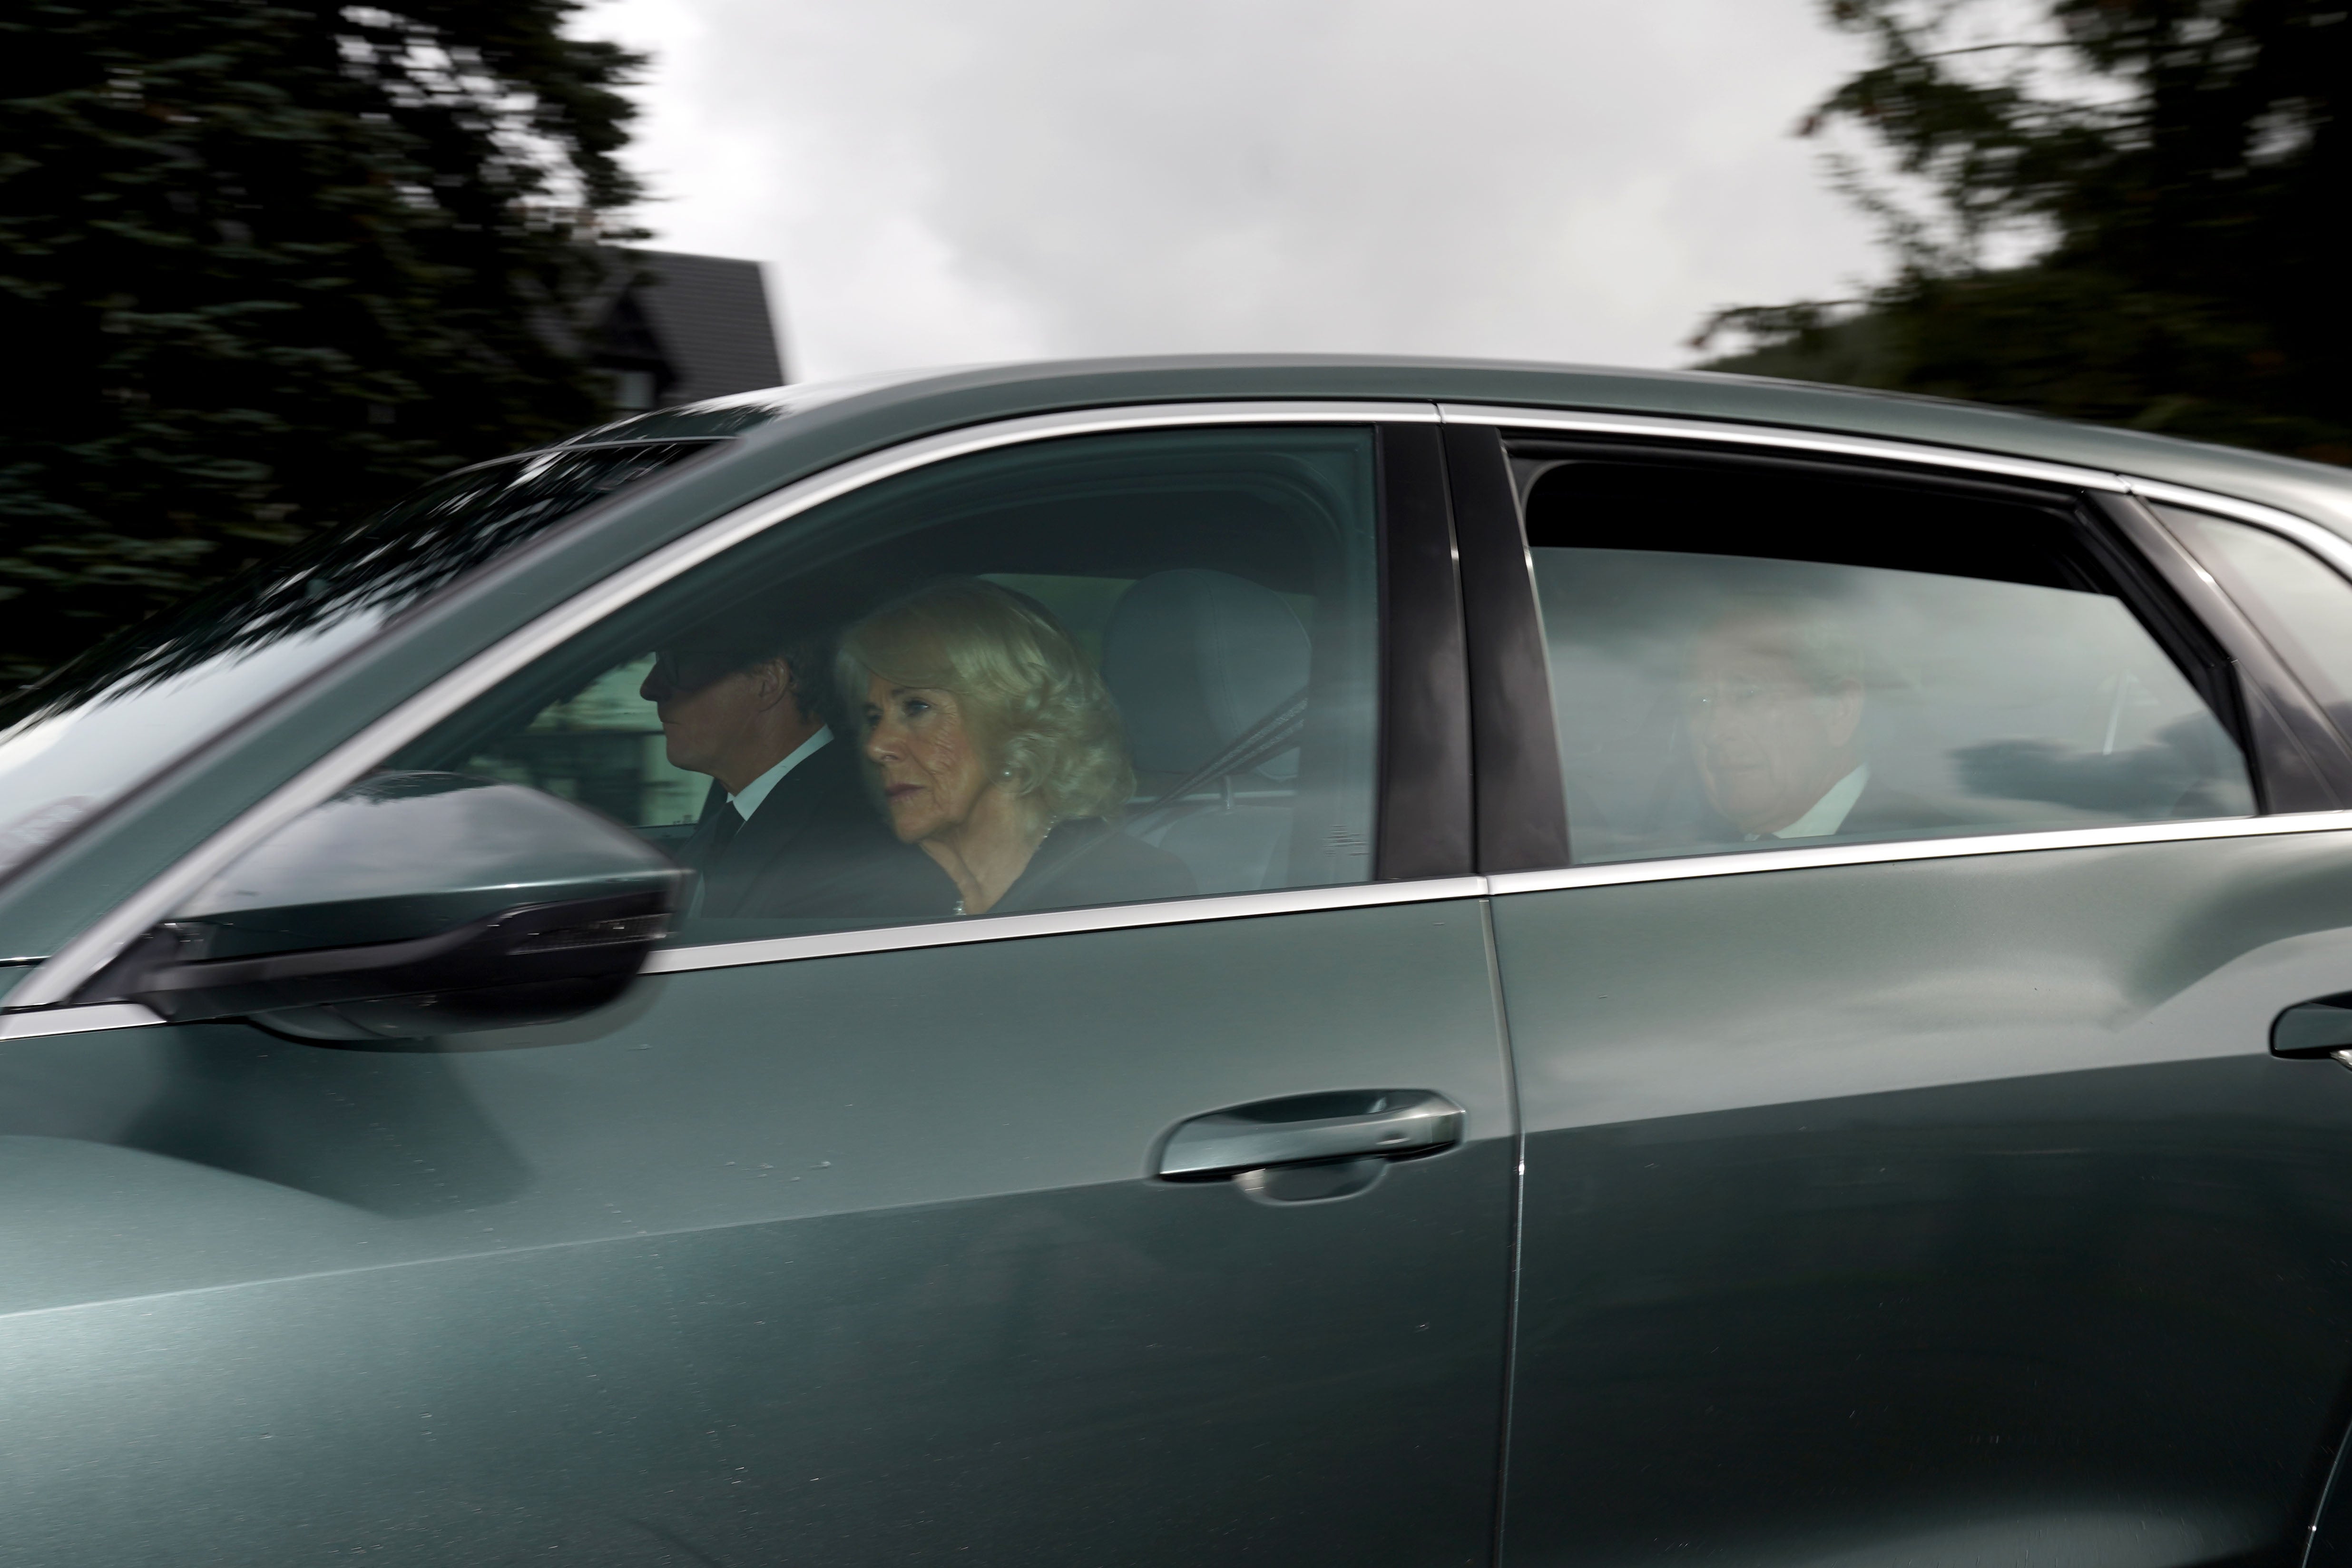 King Charles III and the Queen Consort leave Birkhall in Scotland as they travel to London (Andrew Milligan/PA)